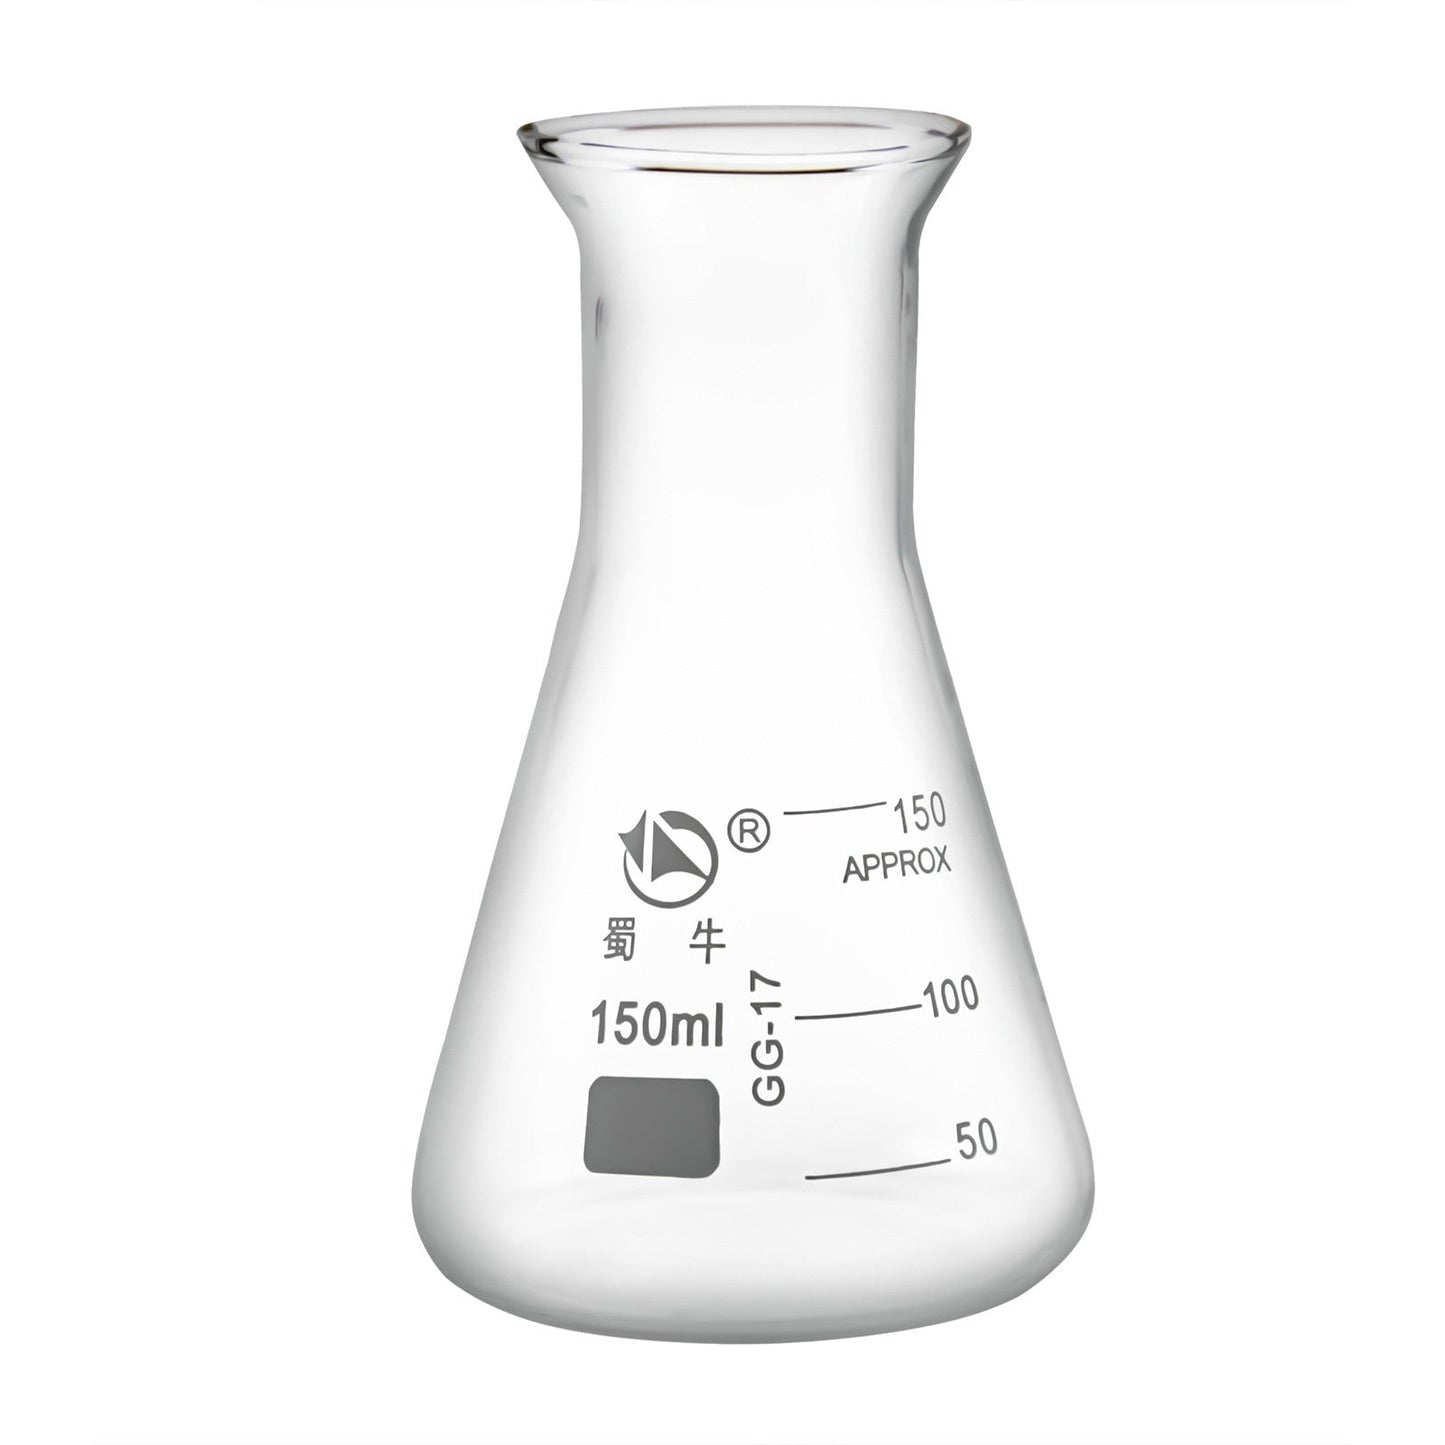 50ml ~5000ml Glass Erlenmeyer Flask , lab7th,narrow neck,glass conical flask Laboratory use, glass triangle flask